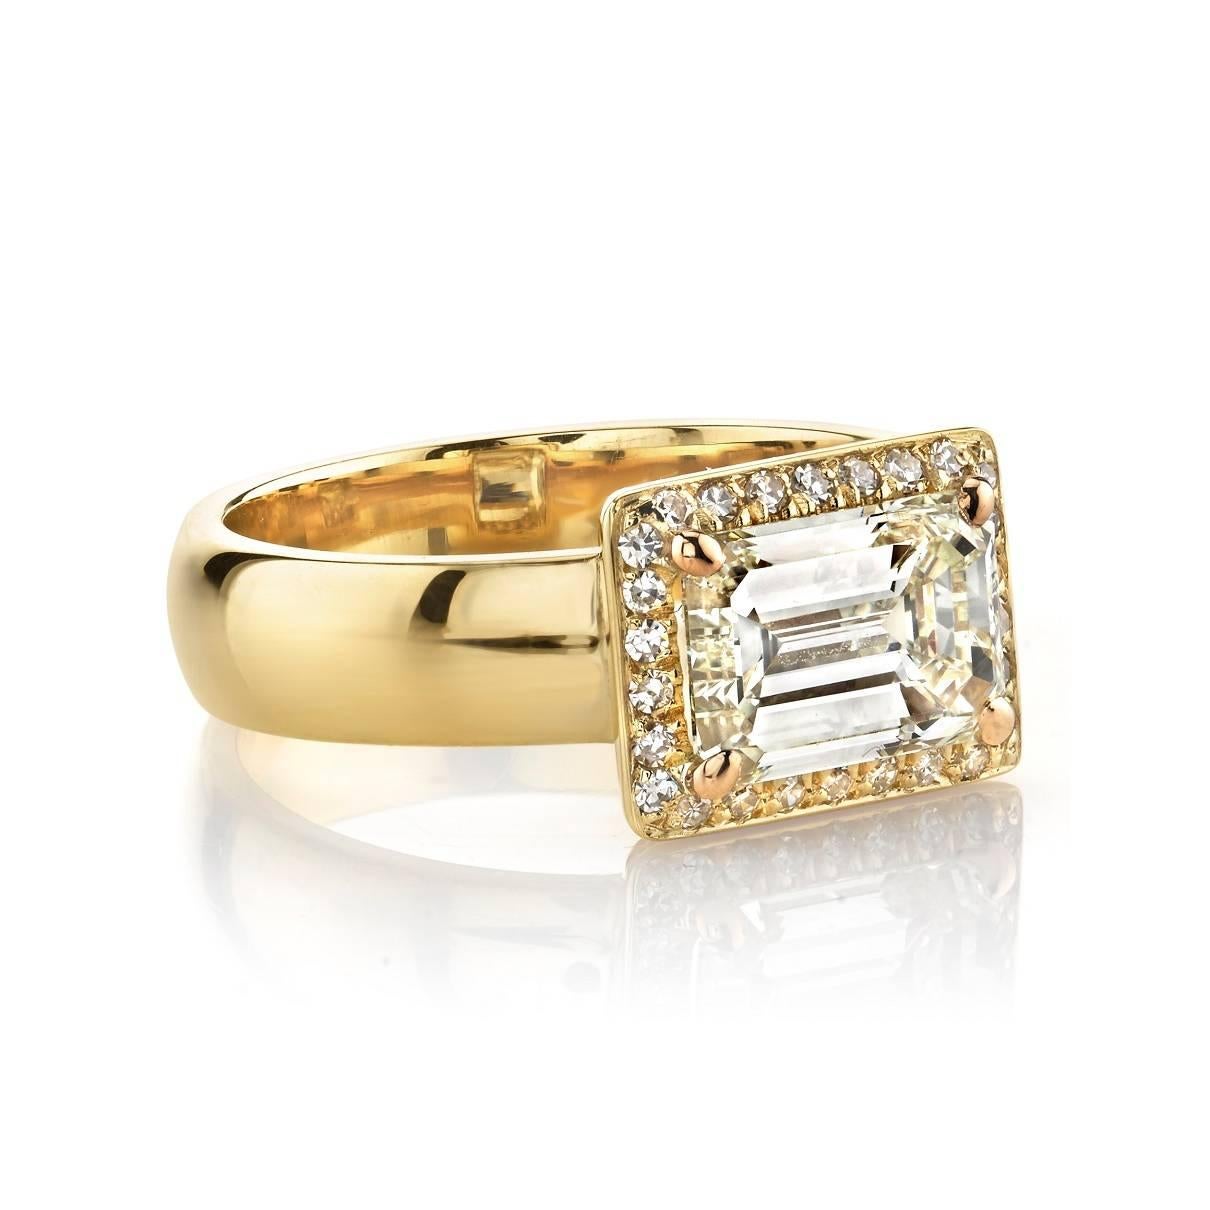 2.01ct K/VVS2 EGL certified Emerald Cut diamond set in a handcrafted 18k yellow gold mounting. 